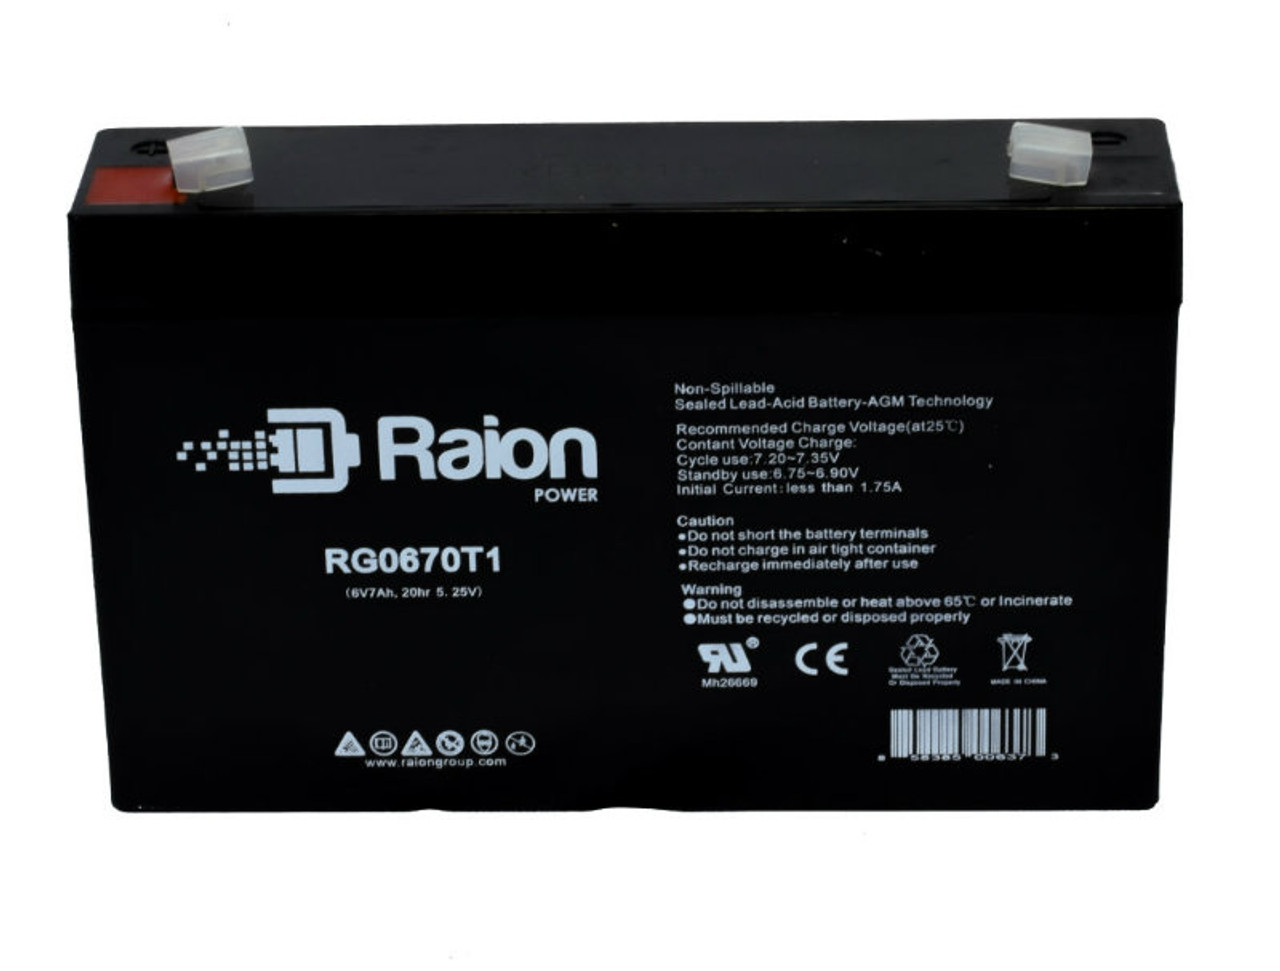 Raion Power RG0670T1 Replacement Battery Cartridge for Lightalarms 2RCI